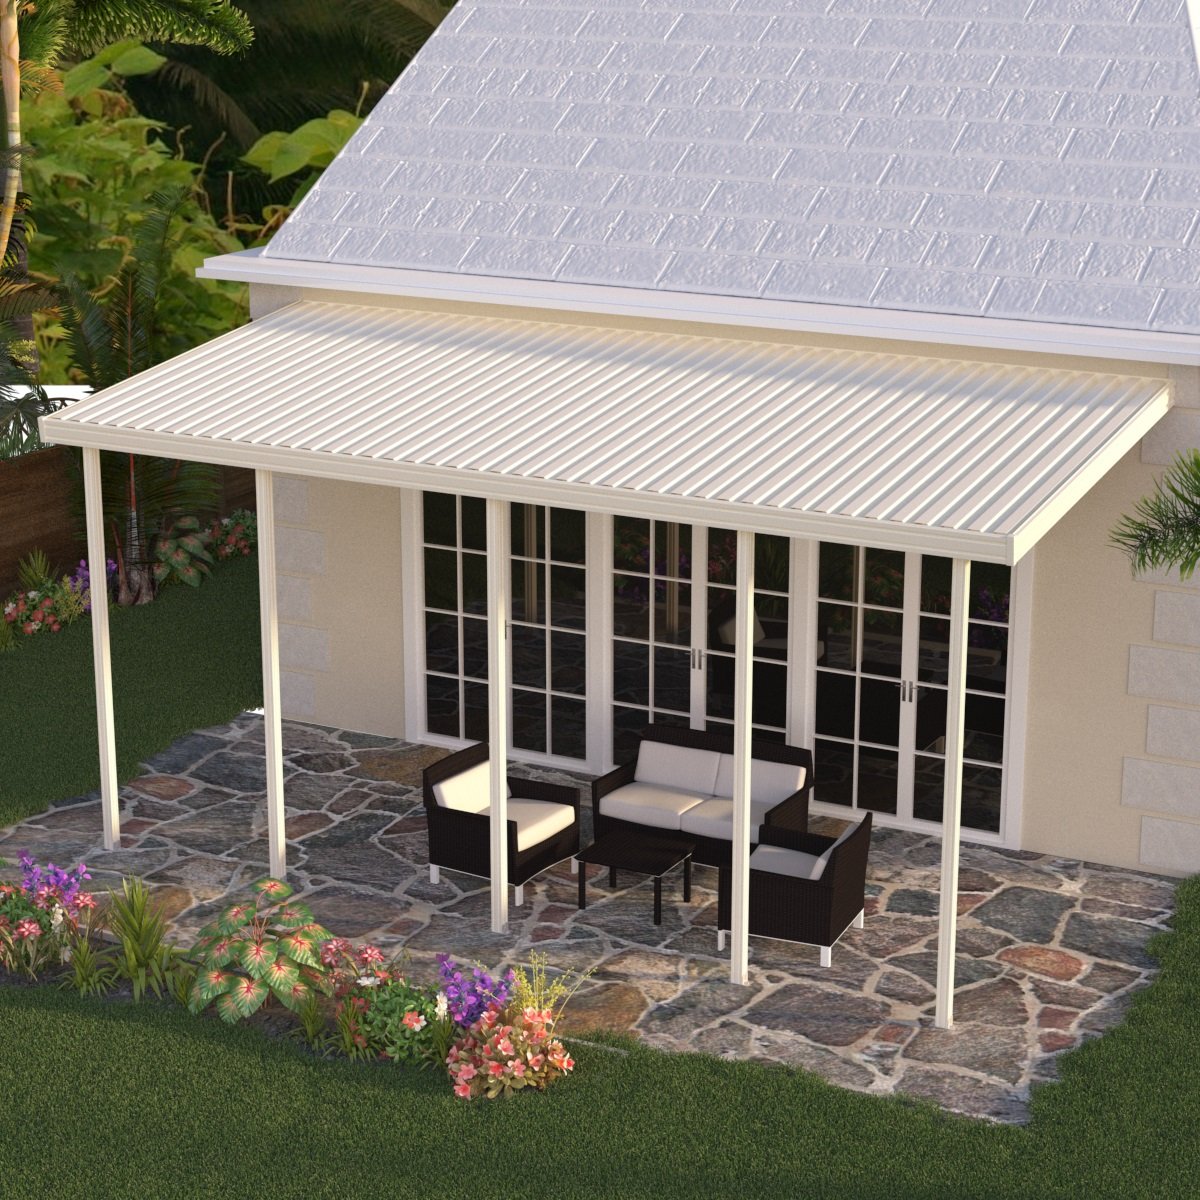 08 ft. Deep x 34 ft. Wide Ivory Attached Aluminum Patio Cover -4 Posts - (10lb Low Snow Area)